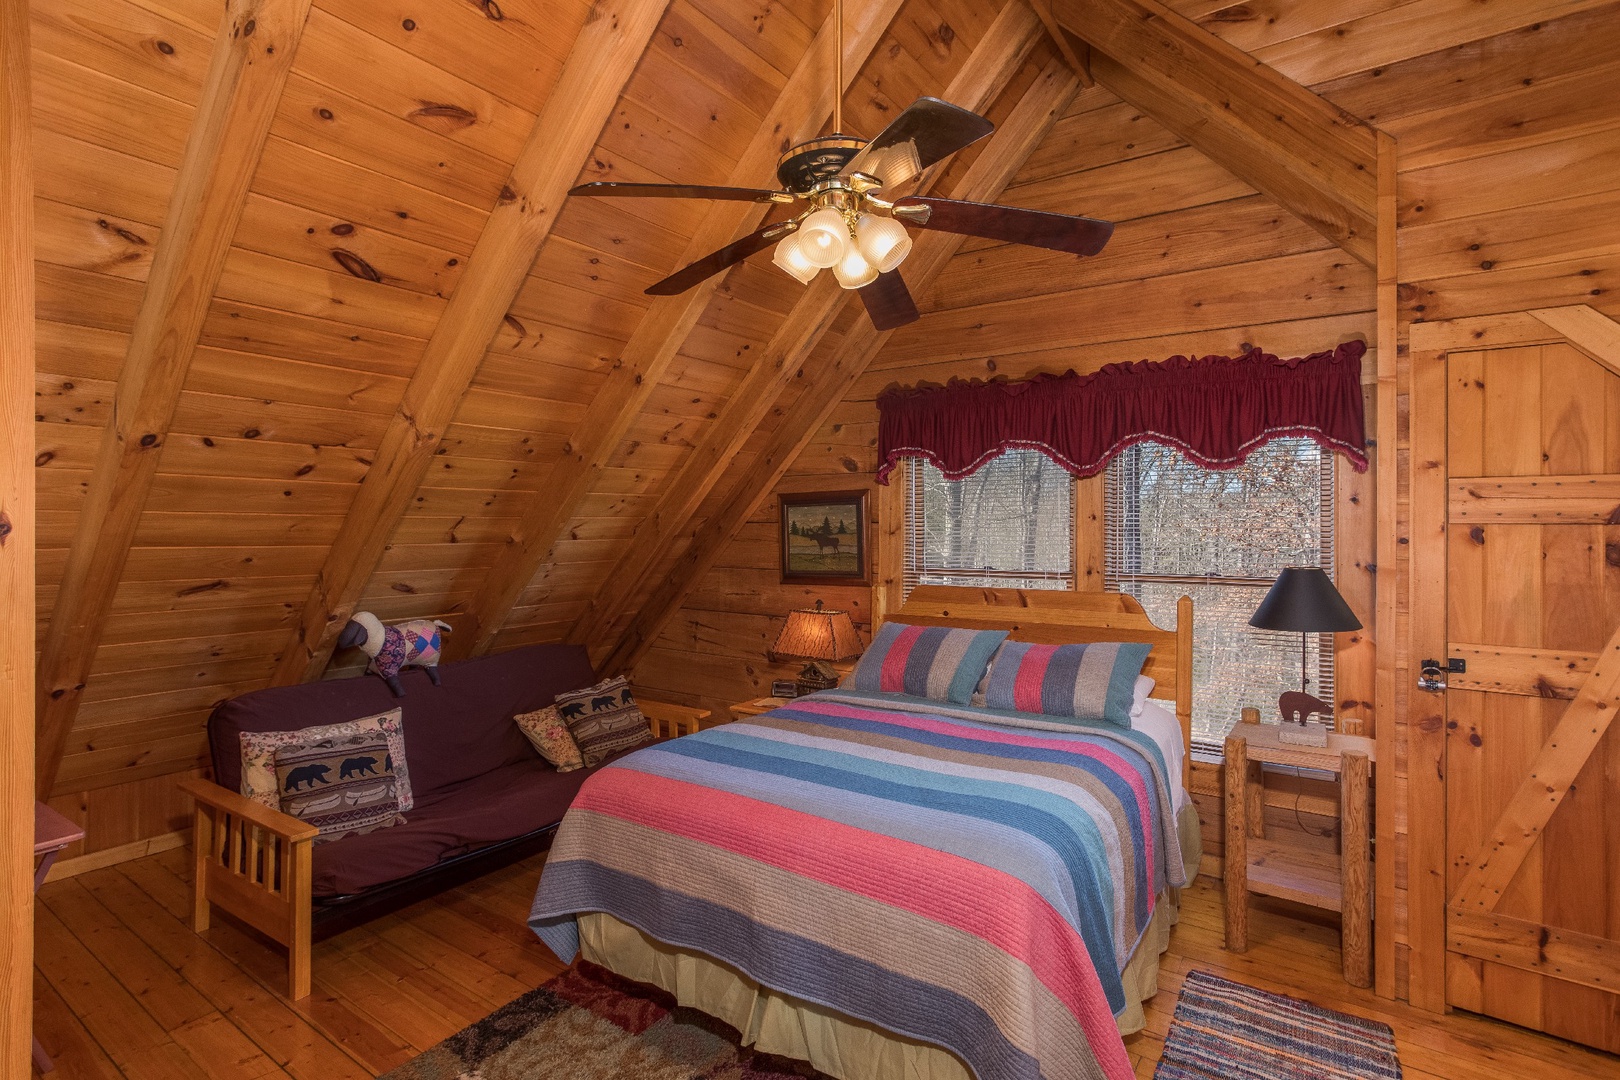 Queen-sized bed in the loft at Cloud 9, a 1-bedroom cabin rental located in Pigeon Forge